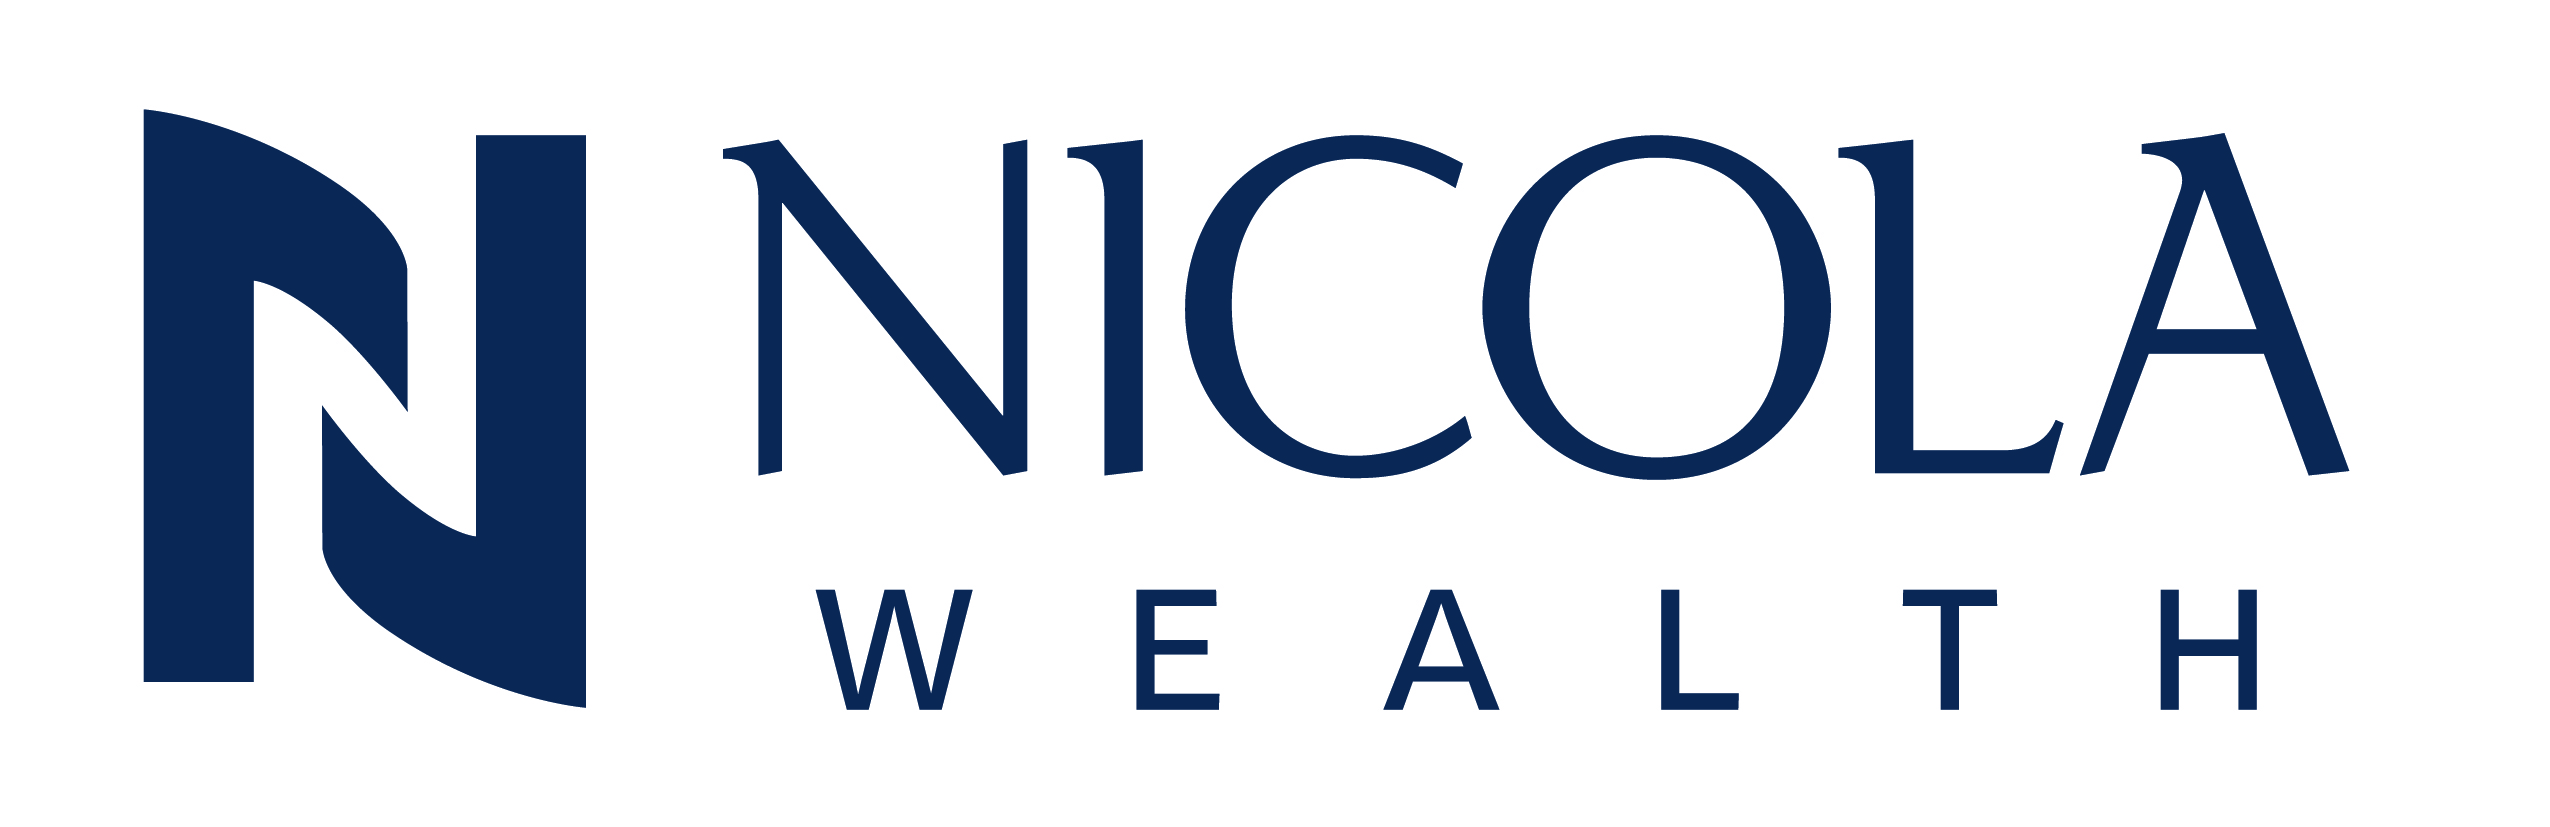 Nicola Wealth Welcomes Robert Olsen as Vice Chair, Private Capital